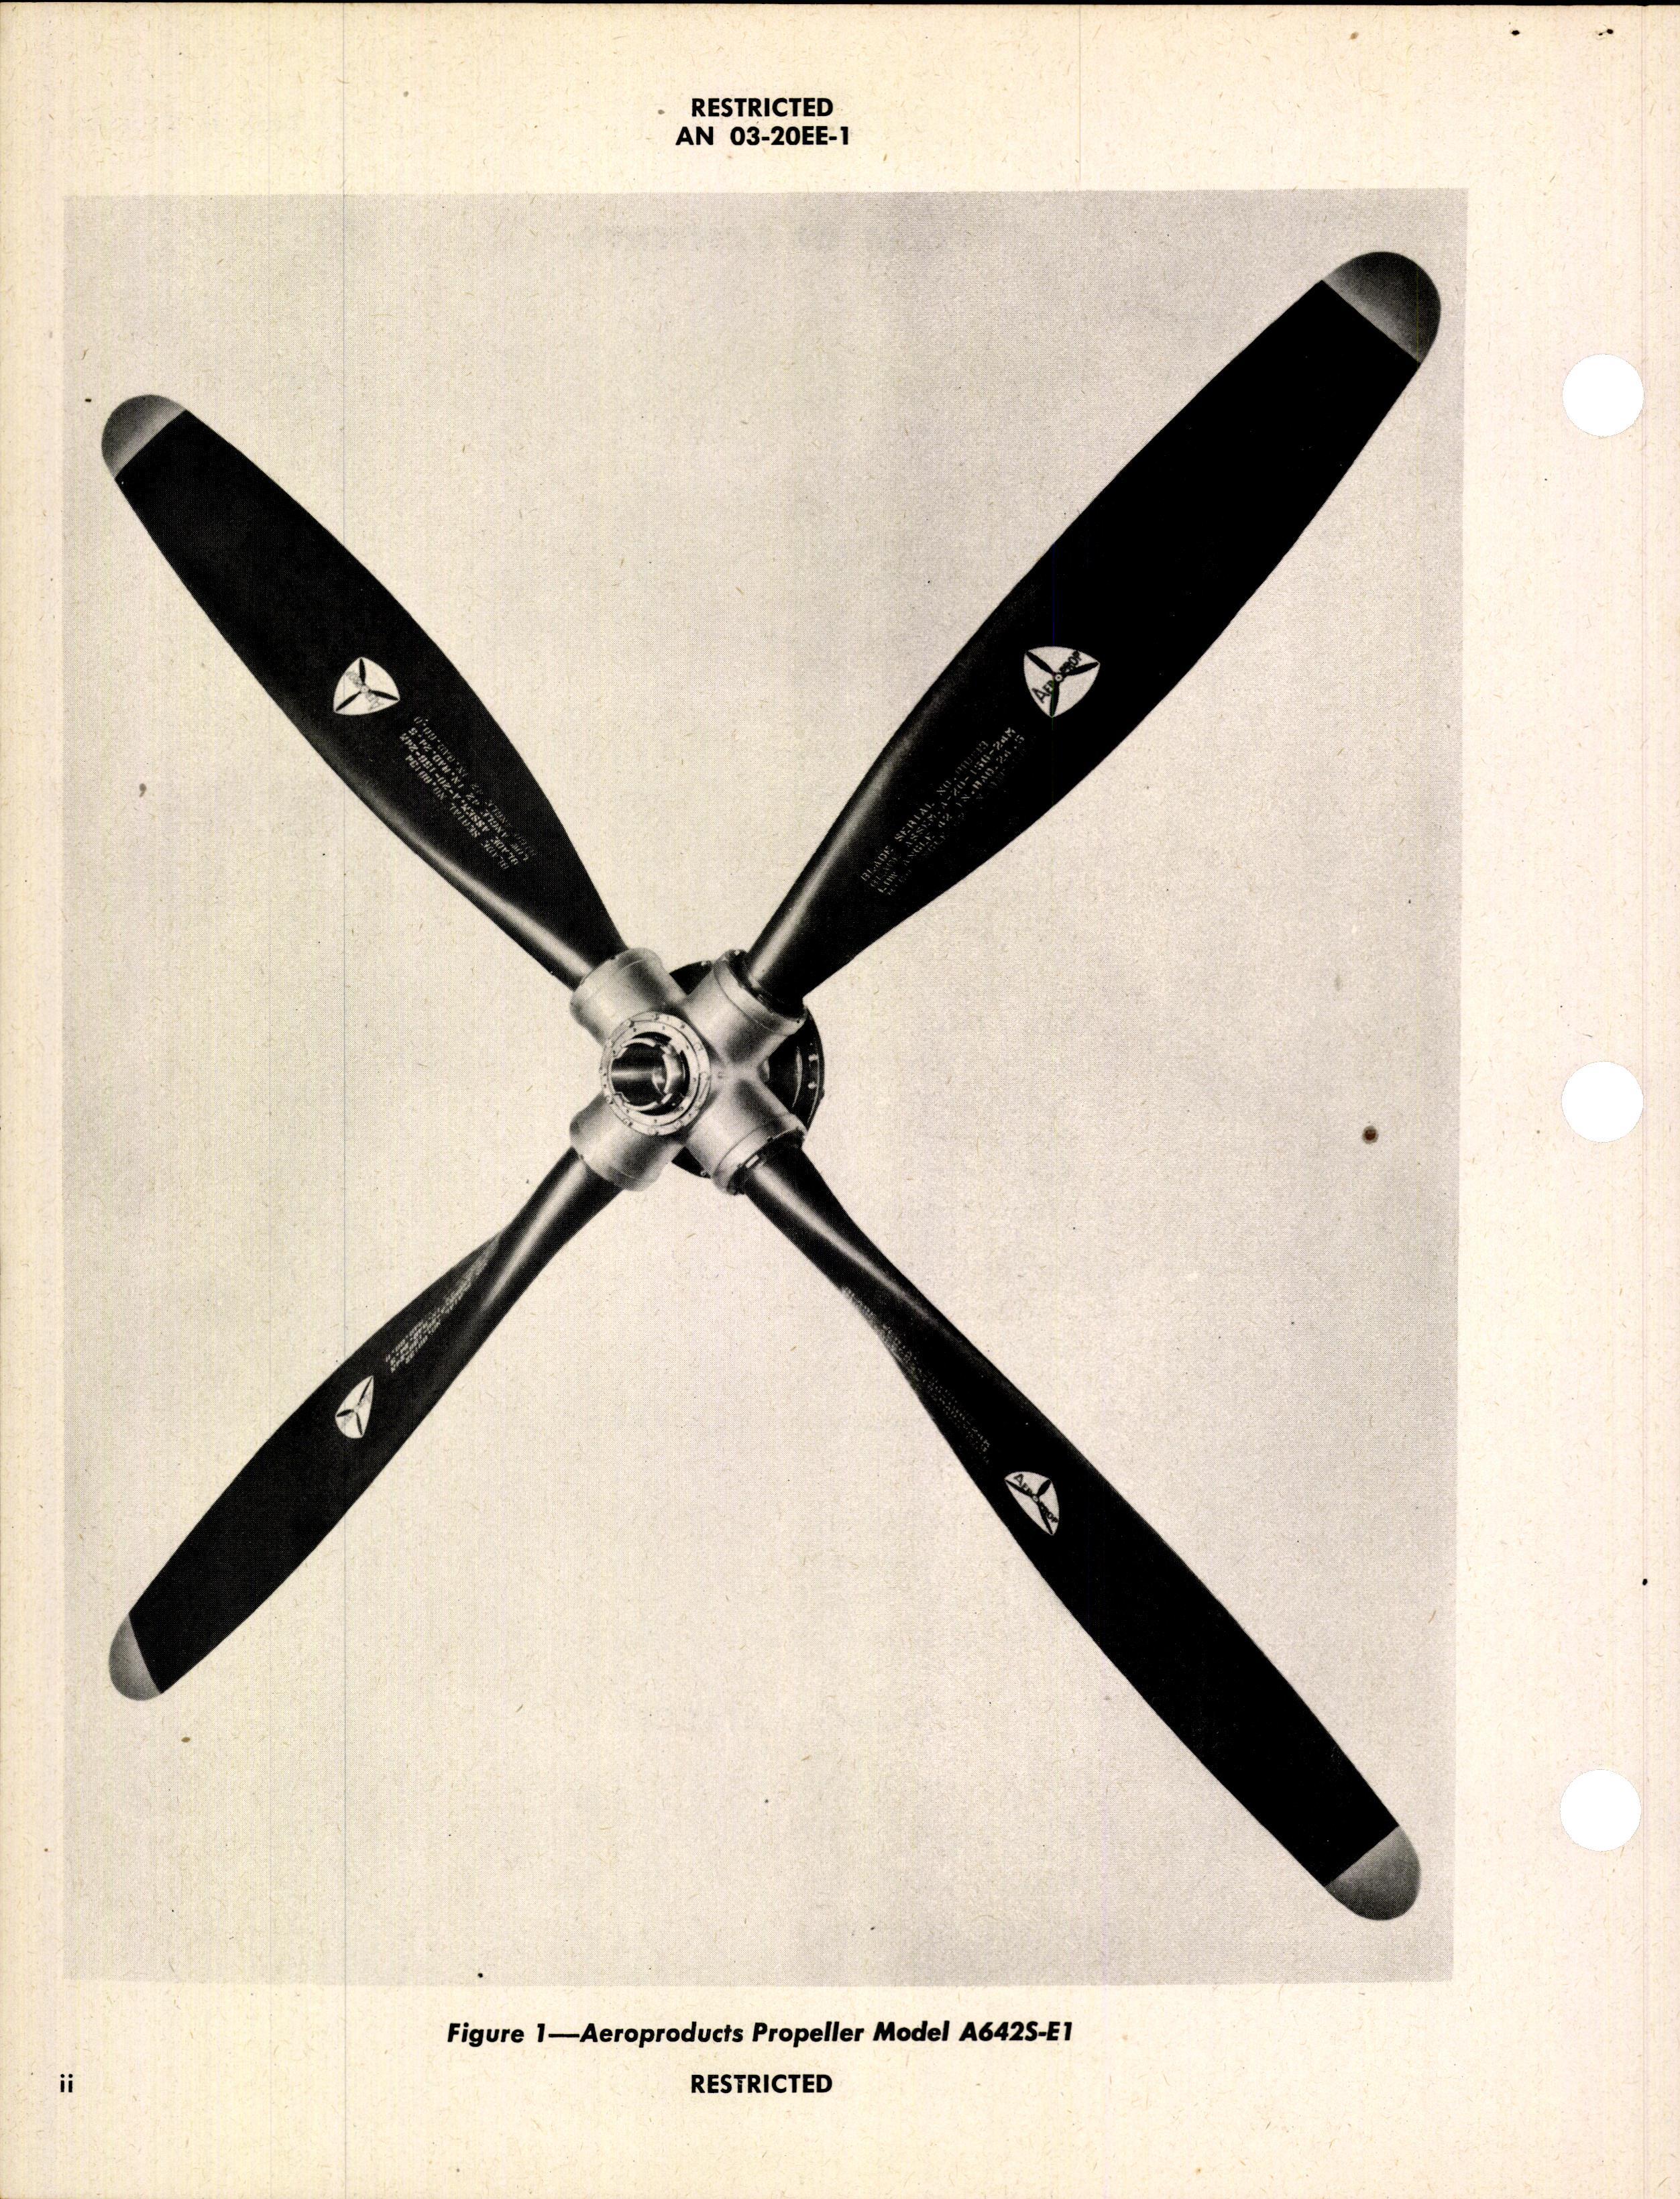 Sample page 4 from AirCorps Library document: Handbook of Instructions with Parts Catalog for Hydraulically Operated Propellers